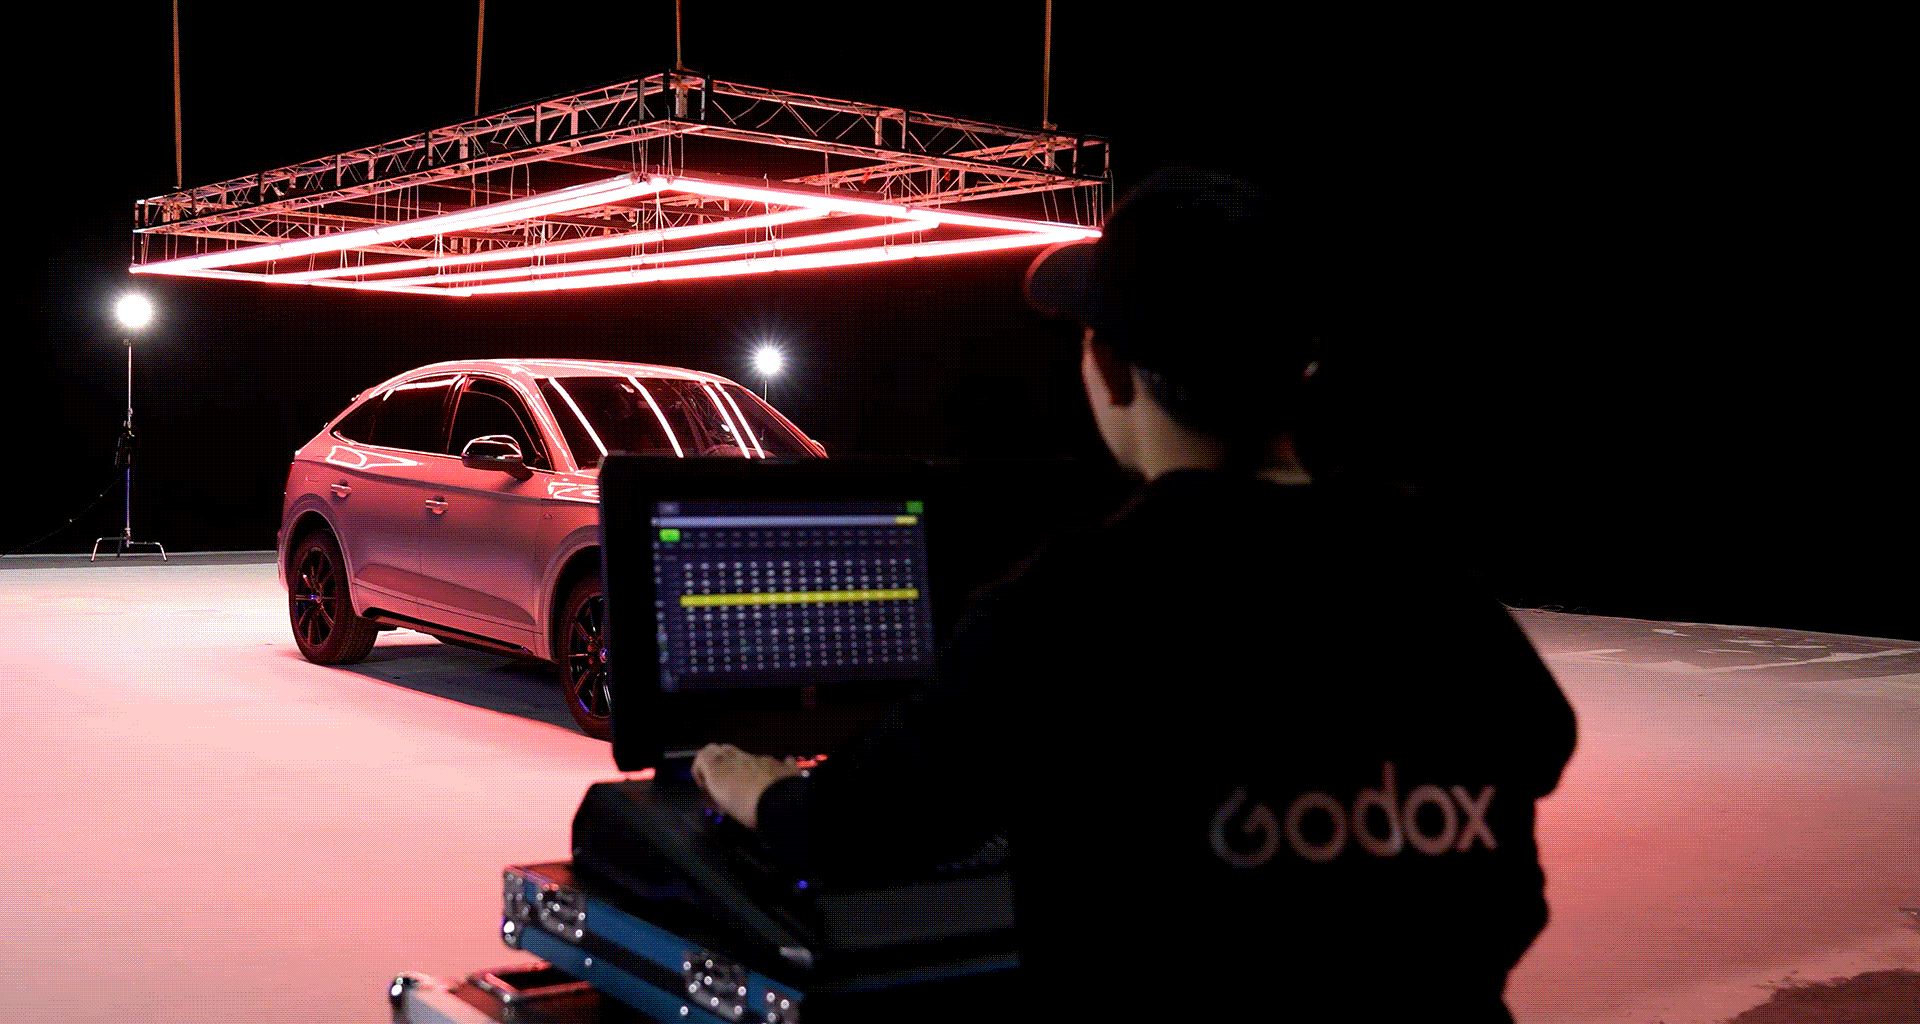 Godox KNOWLED TP4R-K8 RGBWW Pixel Tube Light being controlled by a DMX control console